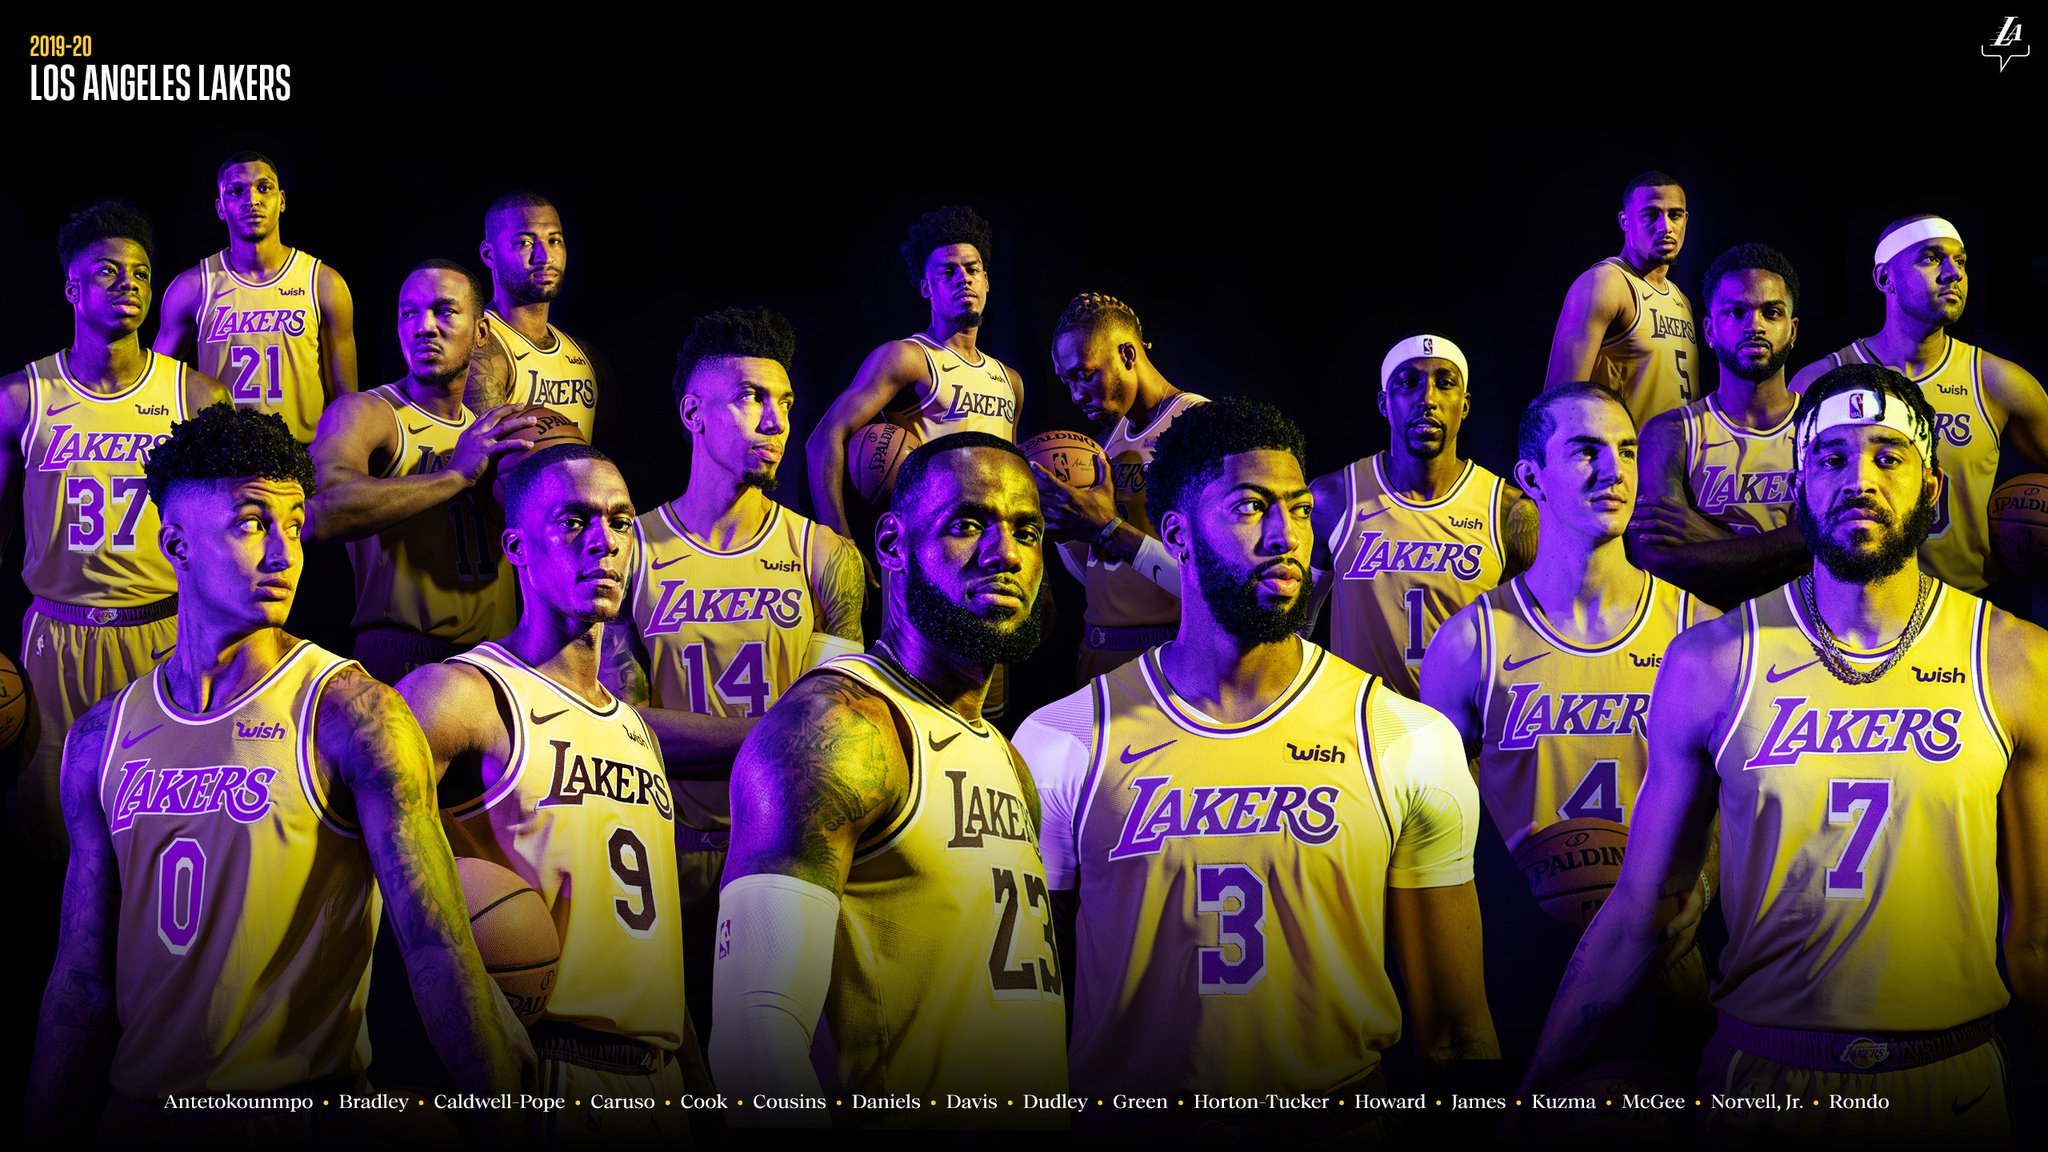 Los Angeles Lakers on X: We're back. Introducing your 2019-20 Los